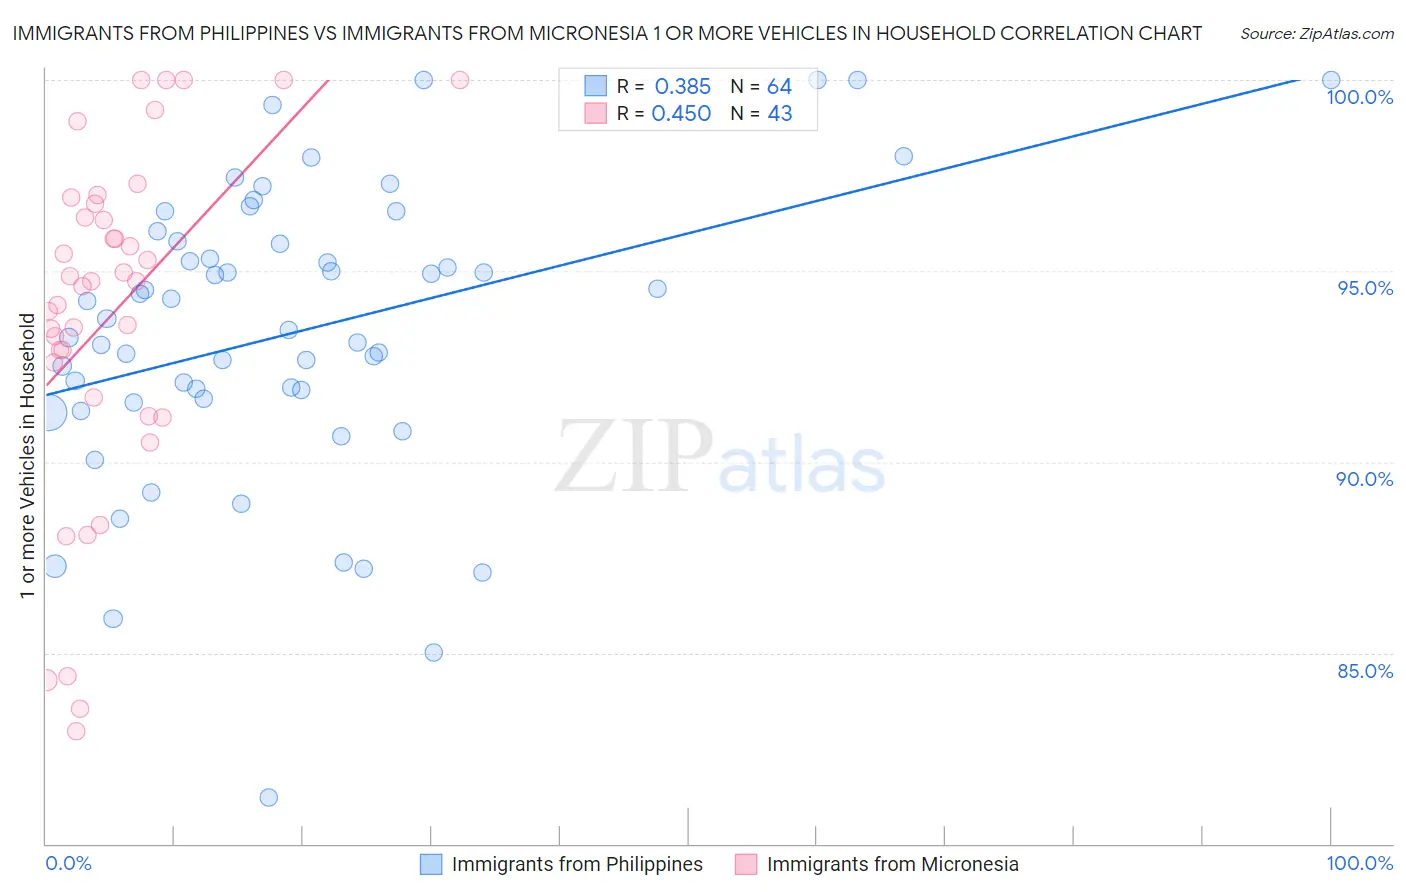 Immigrants from Philippines vs Immigrants from Micronesia 1 or more Vehicles in Household